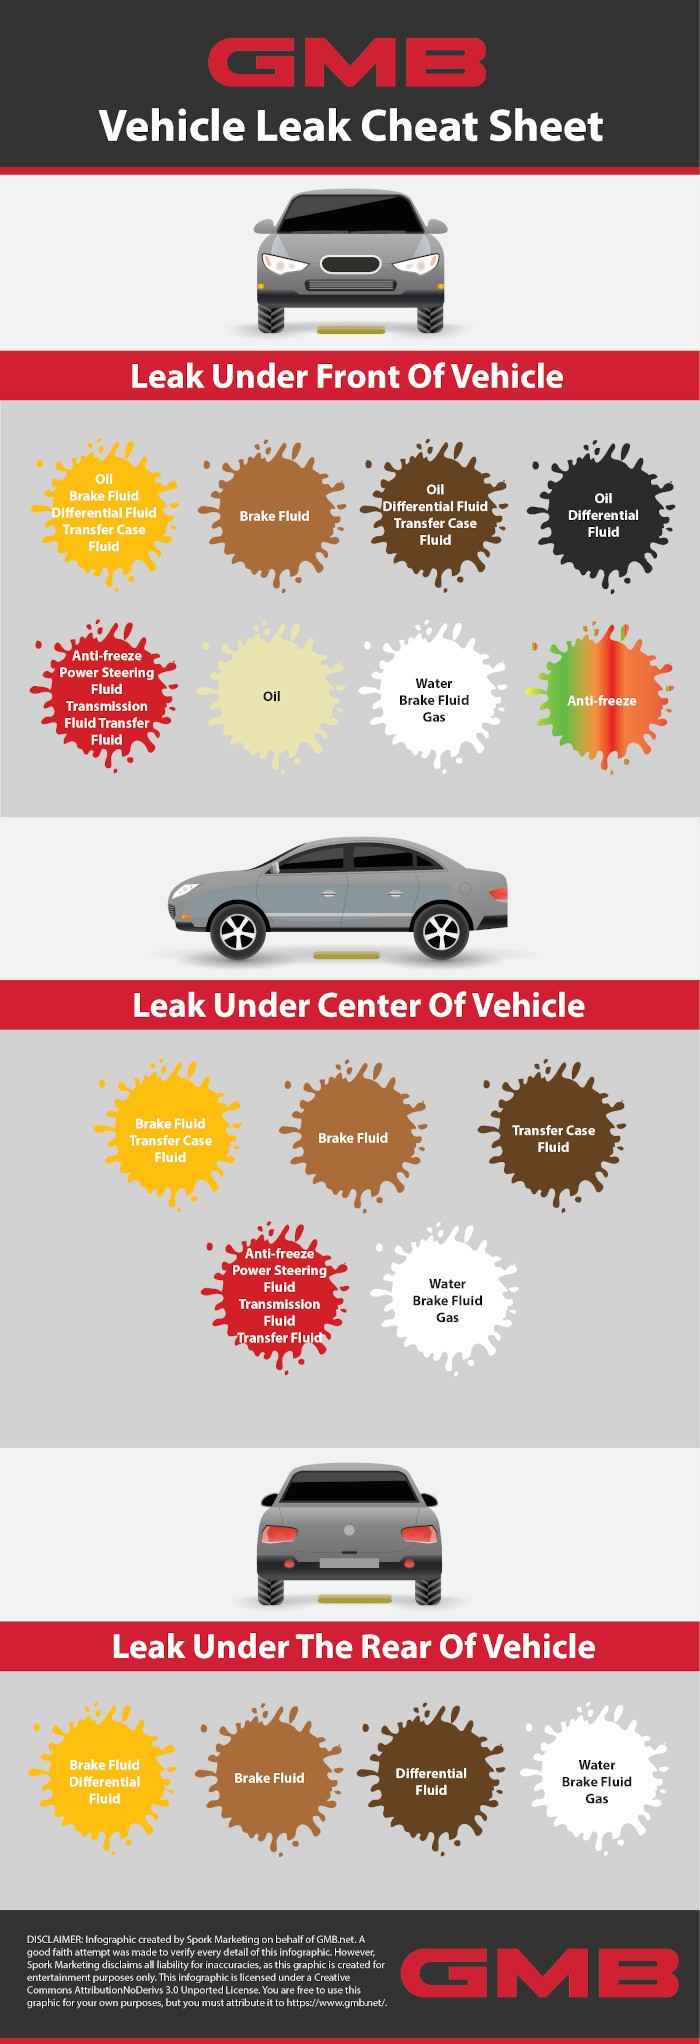 How To Find A Leak In A Car What's That Leak? Use GMB's Leak Cheat Sheet To Find Out! | GMB Blog